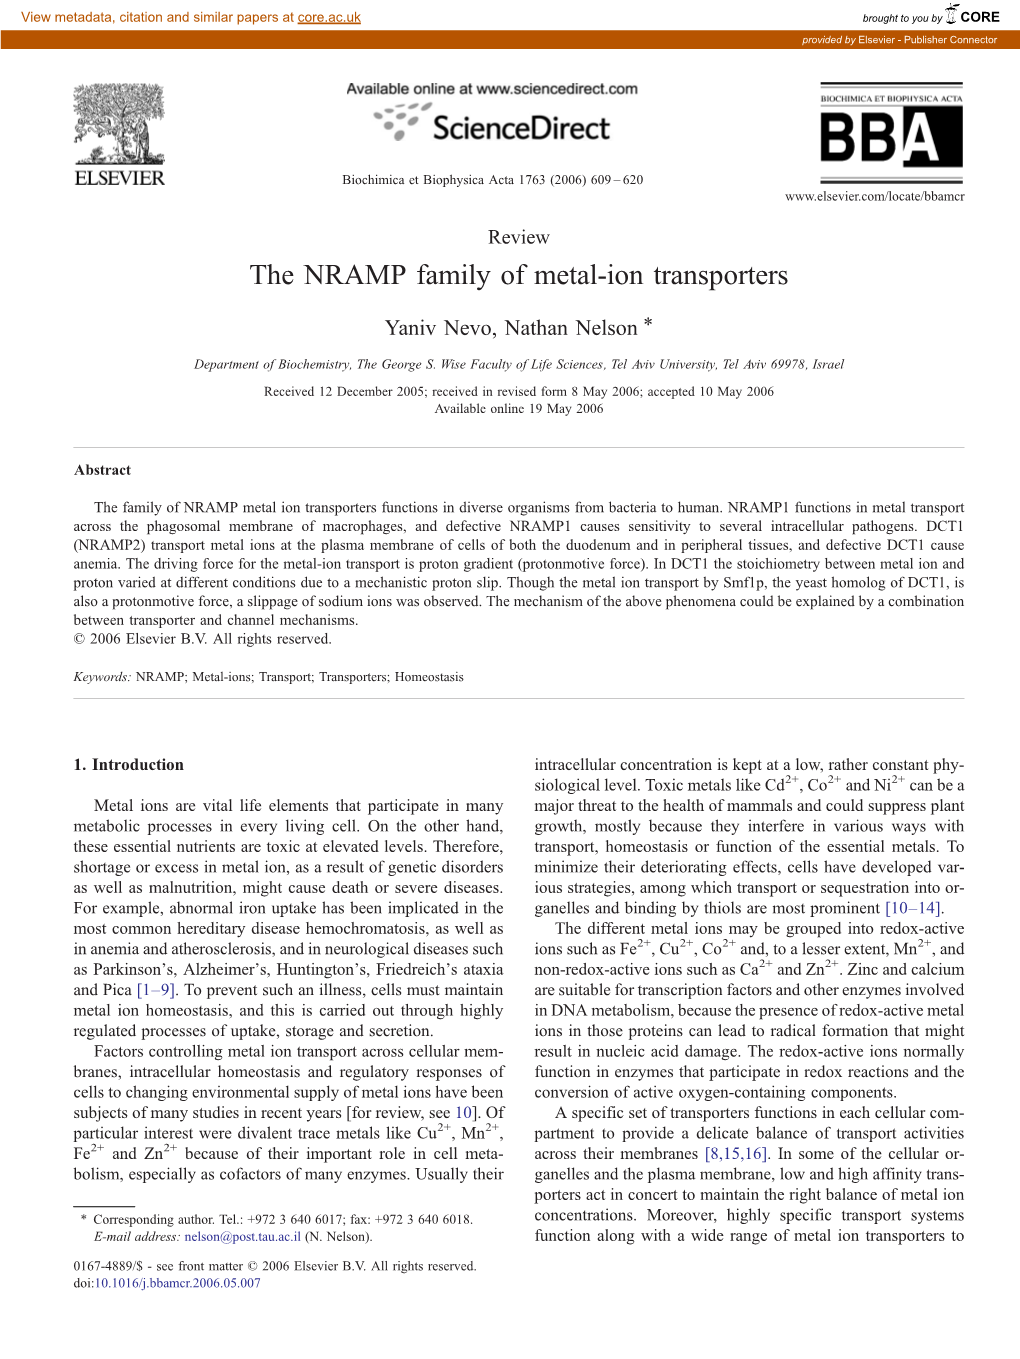 The NRAMP Family of Metal-Ion Transporters ⁎ Yaniv Nevo, Nathan Nelson